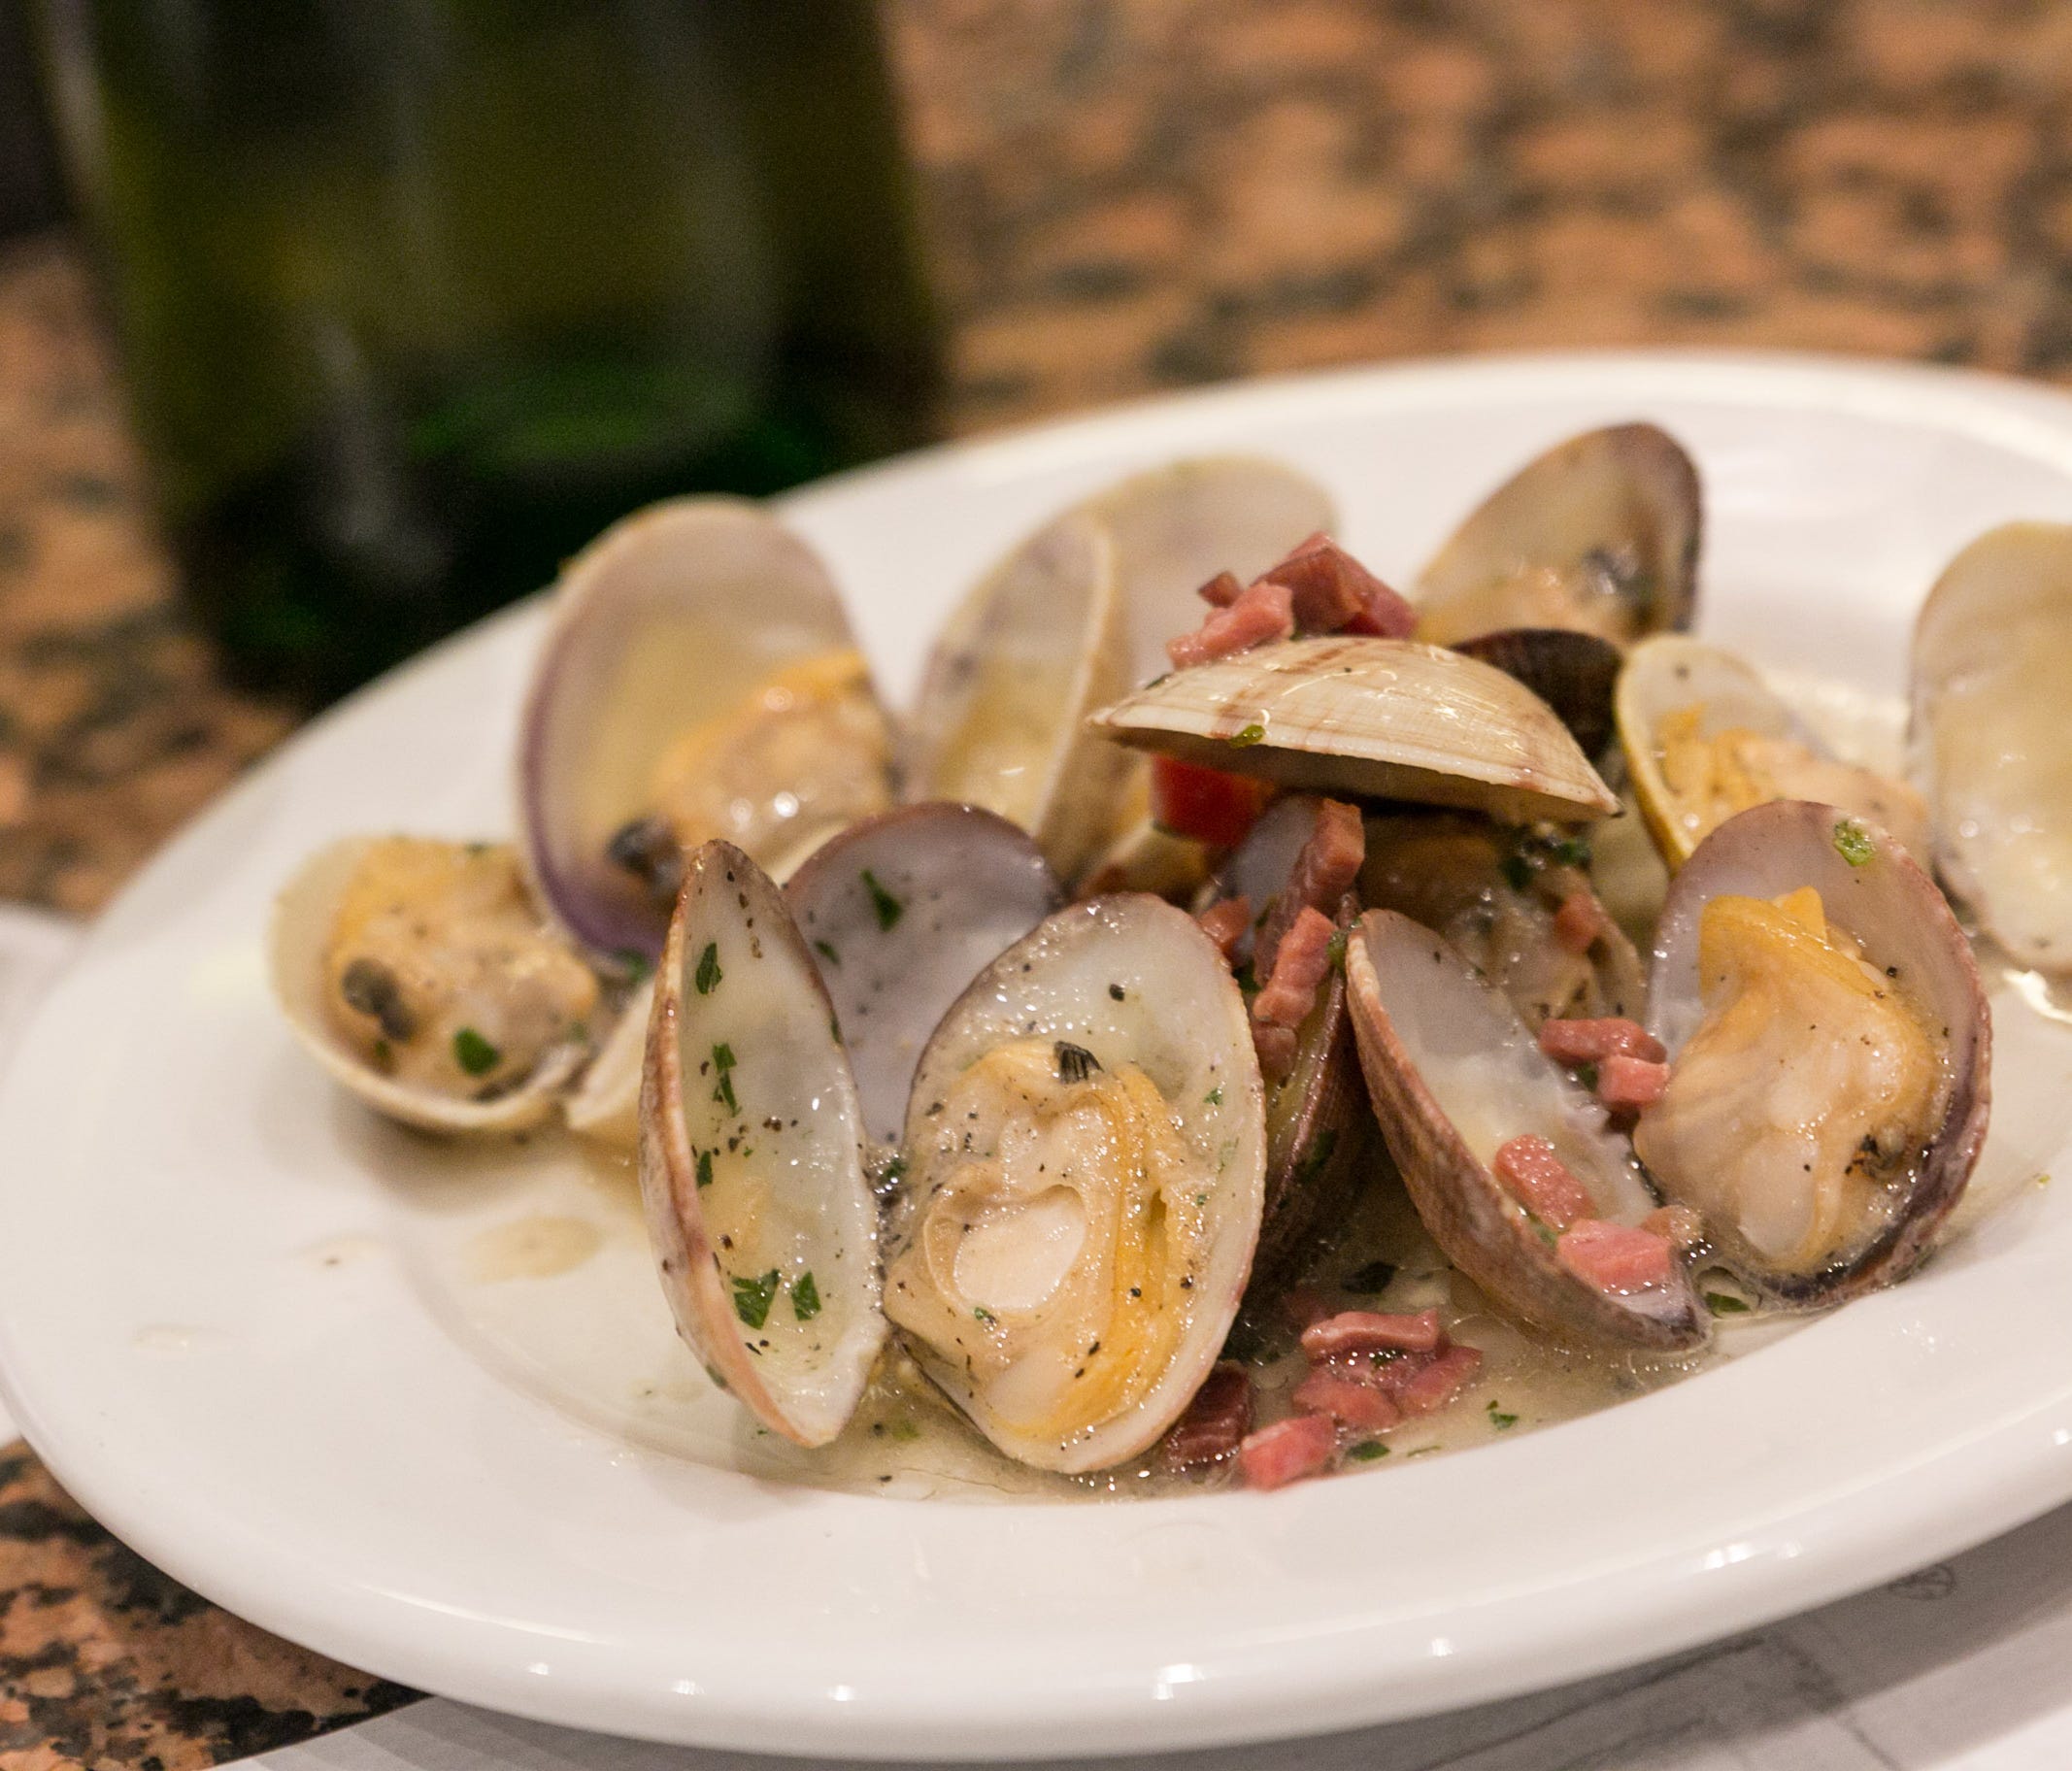 The clams, big and small, are garlicky delicious, as are the squid a la plancha.